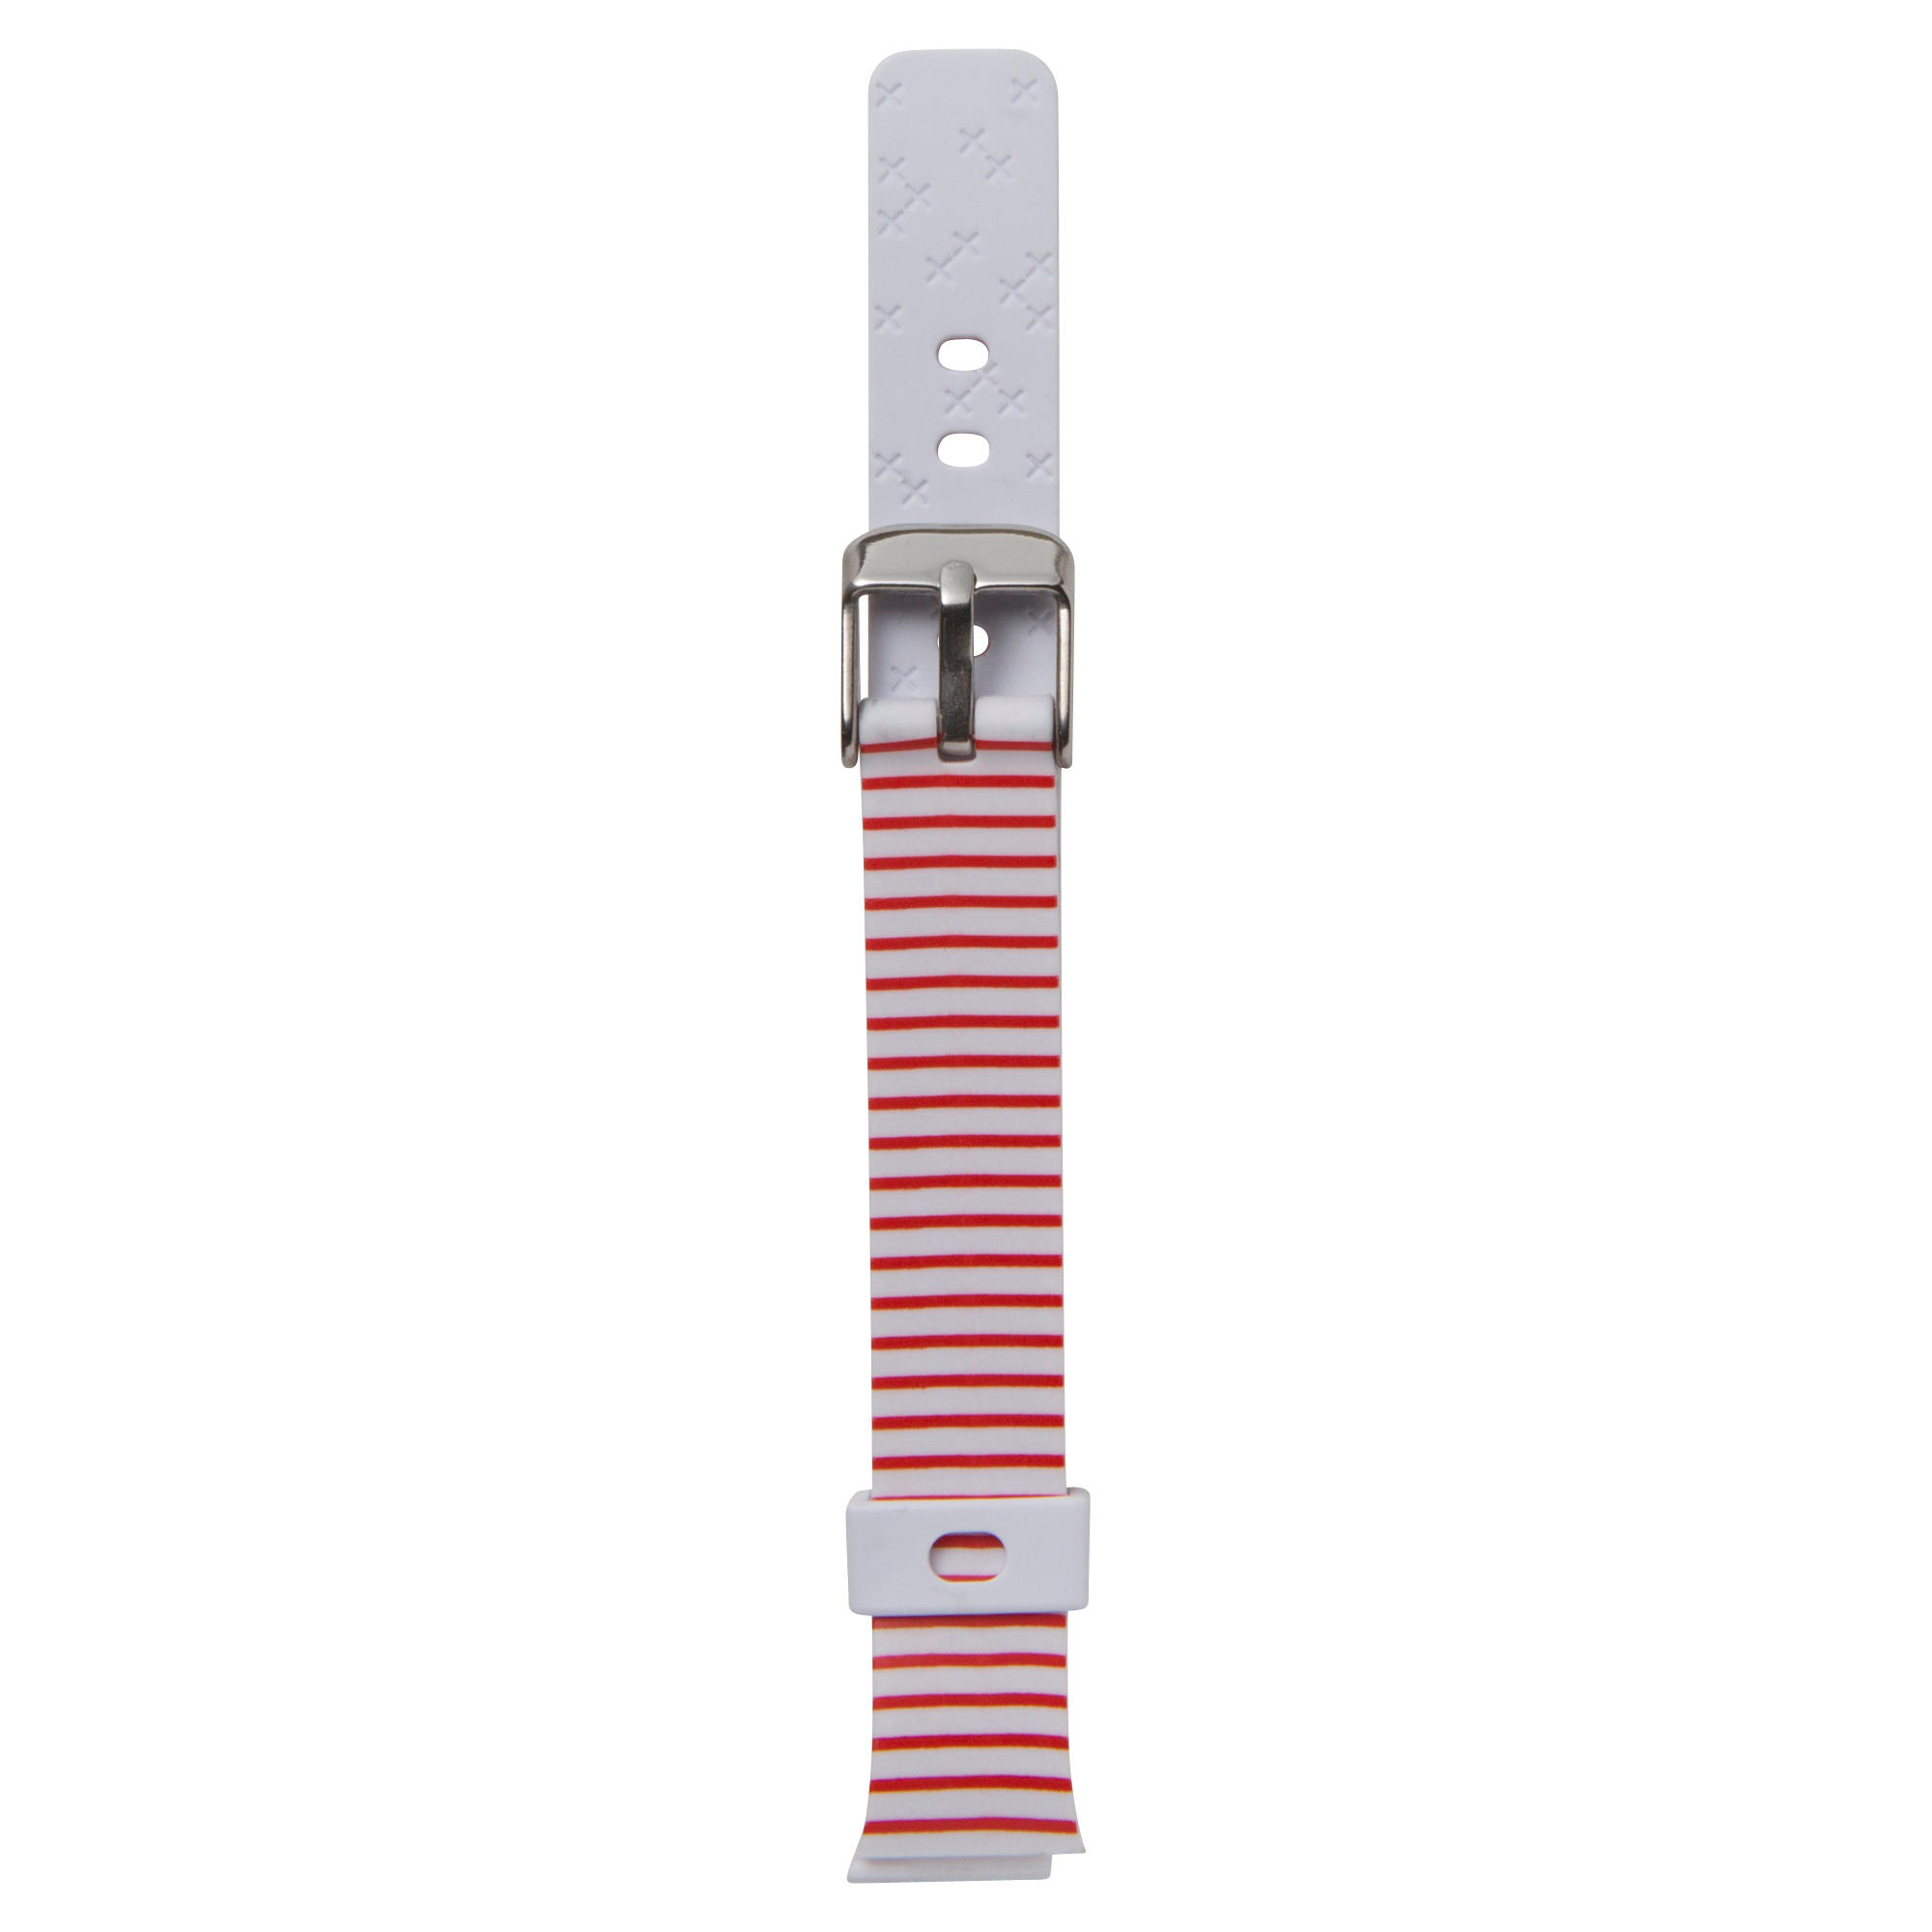 KALENJI Watch strap red and white compatible with W500s and A300s